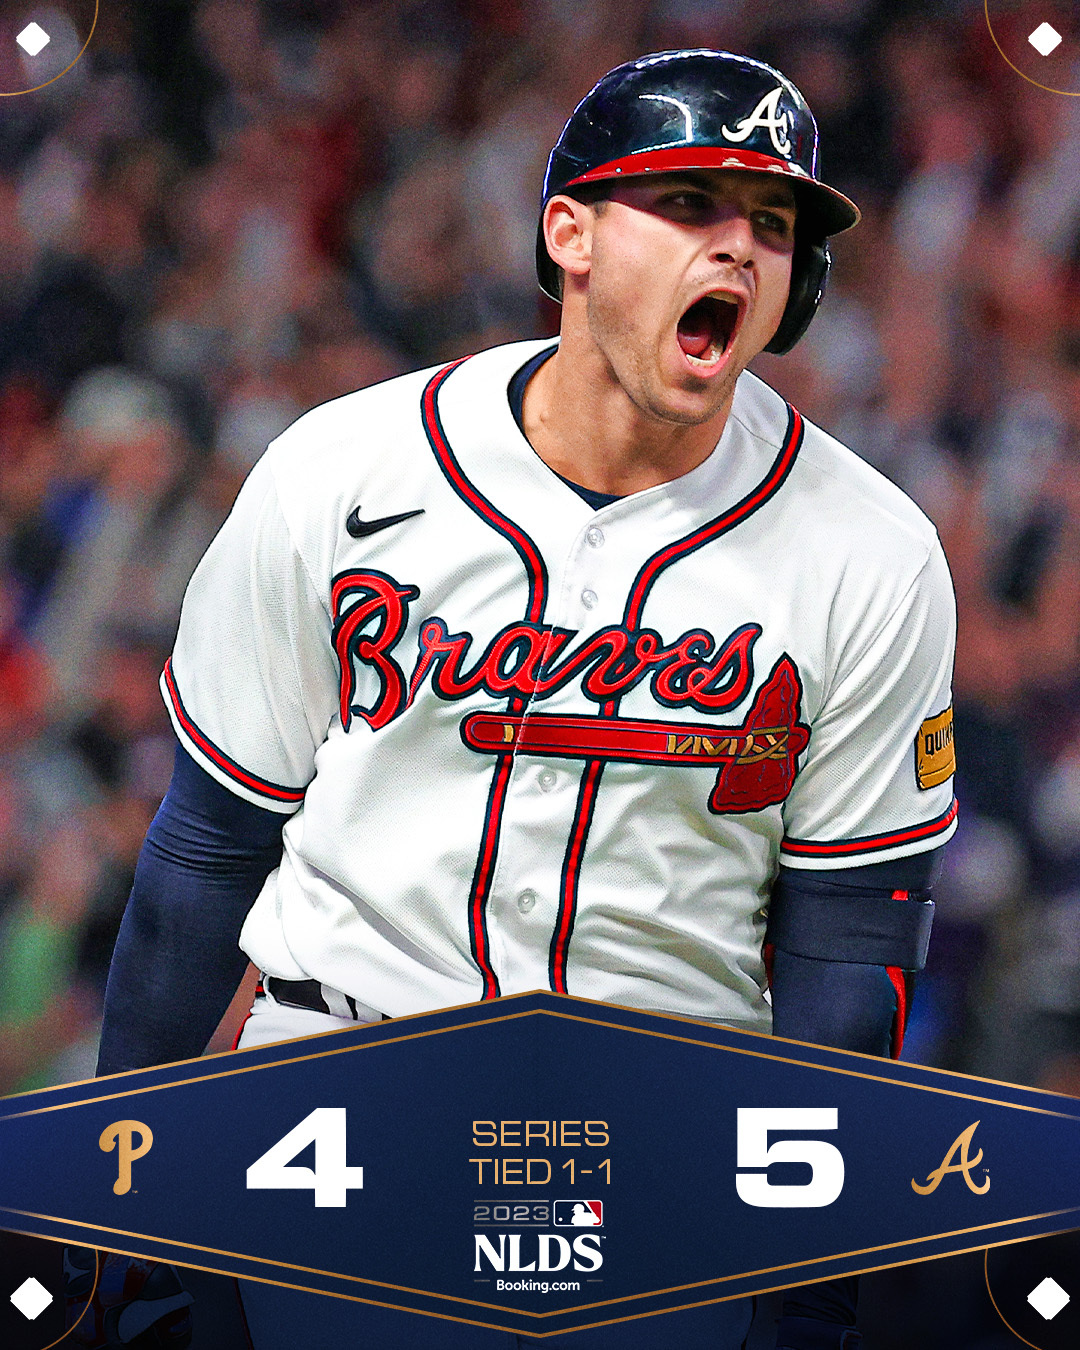 MLB on X: The @Braves complete the comeback to take Game 2